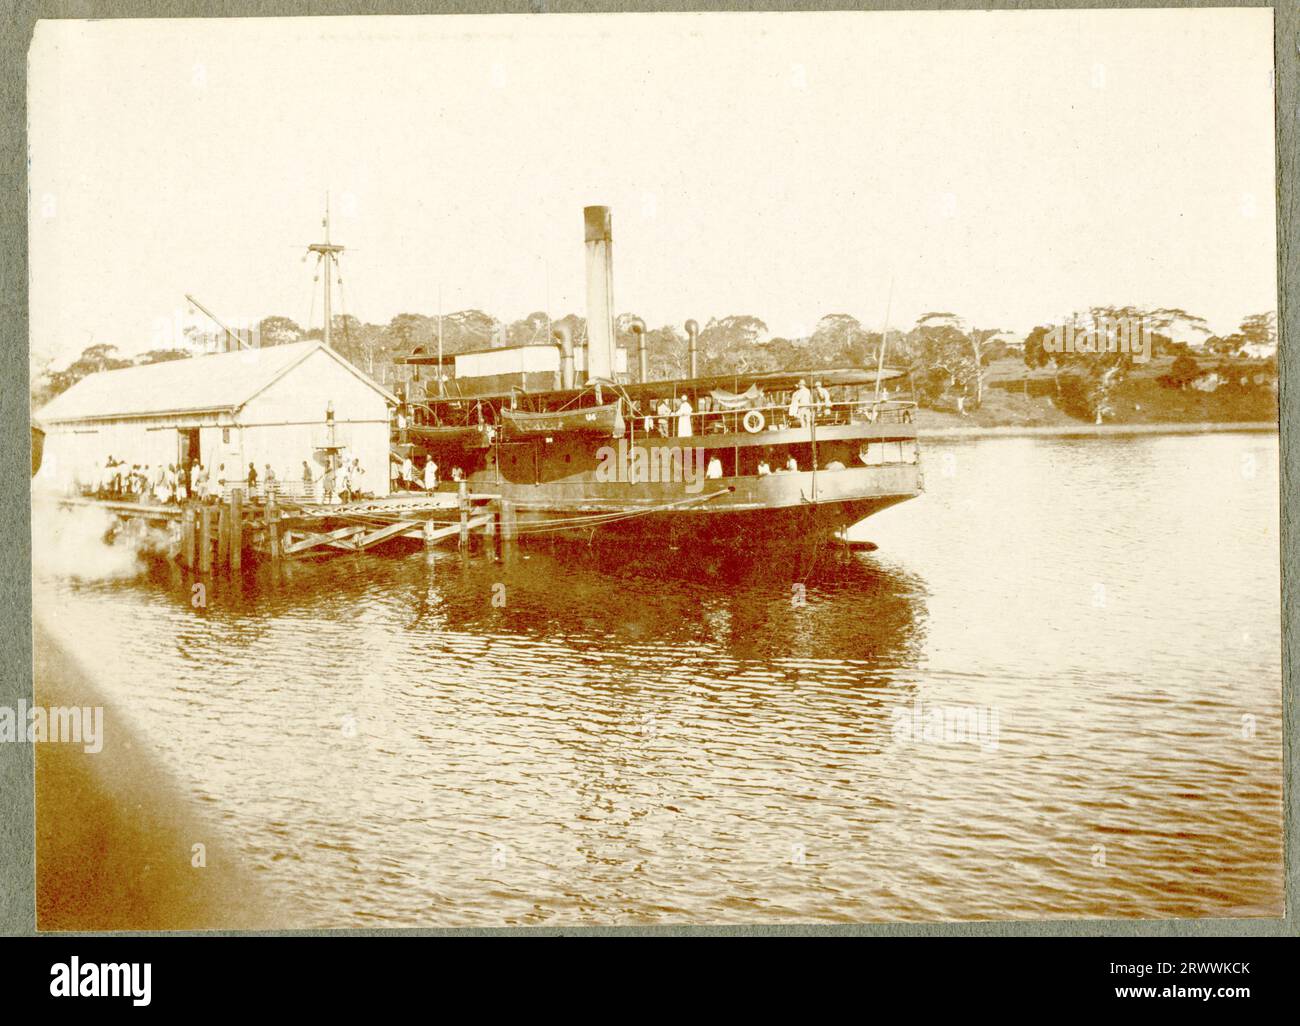 The steamship SS Usoga in the process of loading/ unloading on the pier at Port Bell, Kampala. The ship is partially obscured by a large shed but passengers are visible on upper deck and others, mainly Africans, are waiting to board. Original manuscript caption: SS Usoga. Kampala. Stock Photo